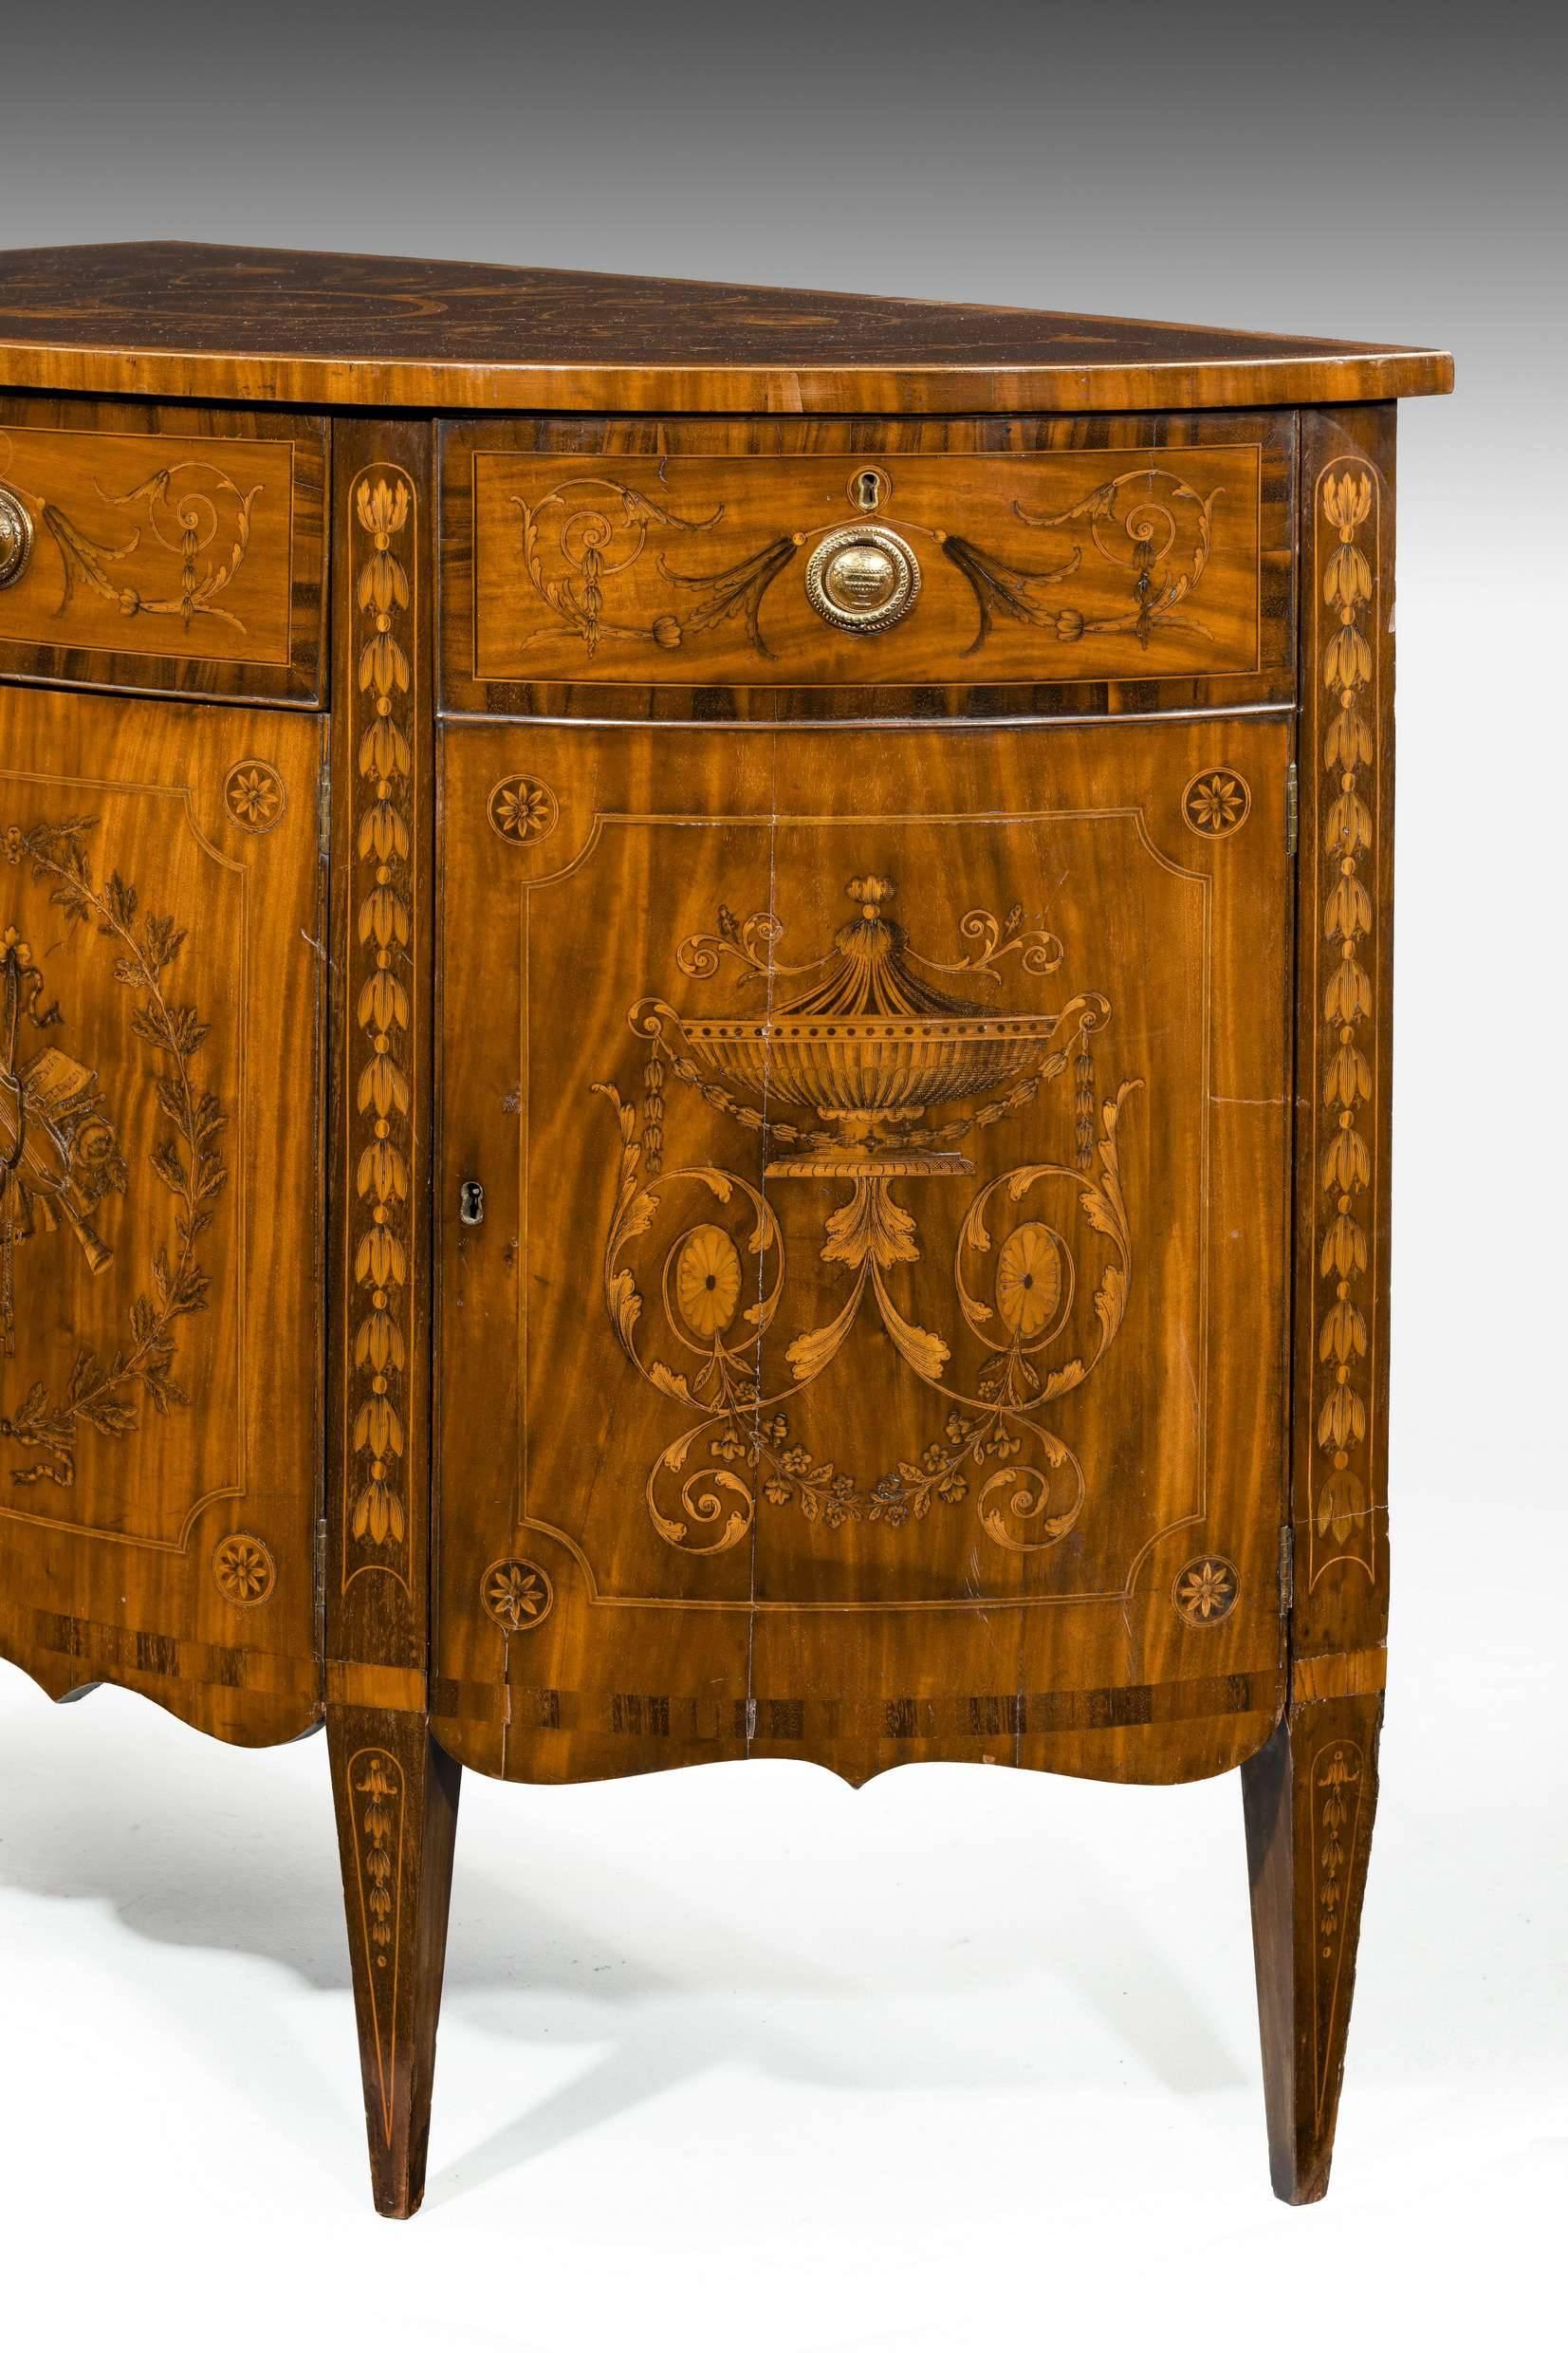 Late 18th Century Marquetry Demilune Commode In Good Condition In Peterborough, Northamptonshire